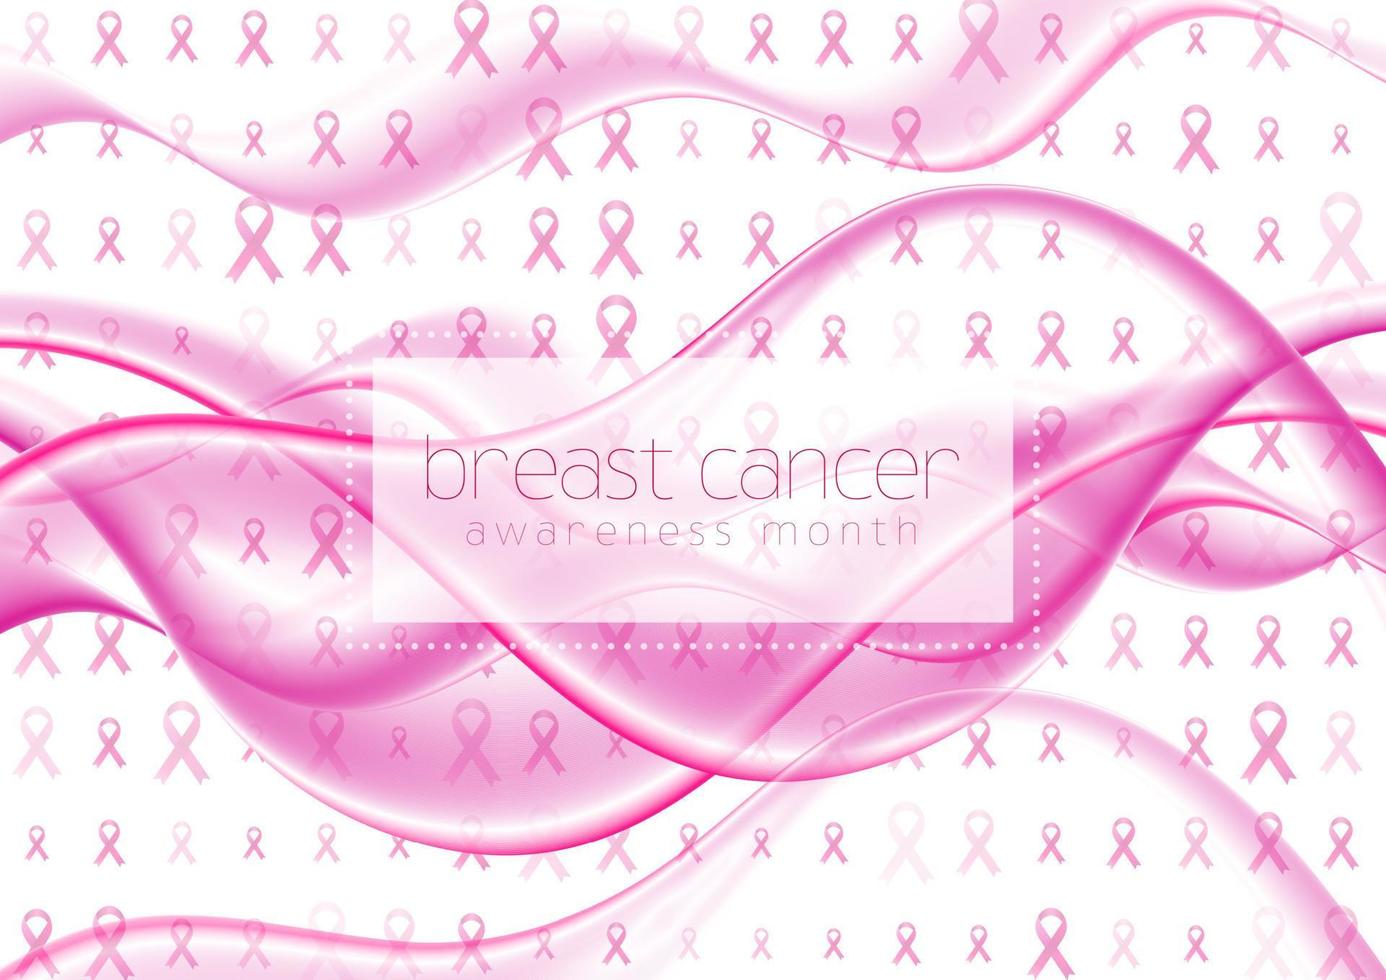 Breast cancer awareness month. Smooth abstract waves and pink ribbon tape background vector